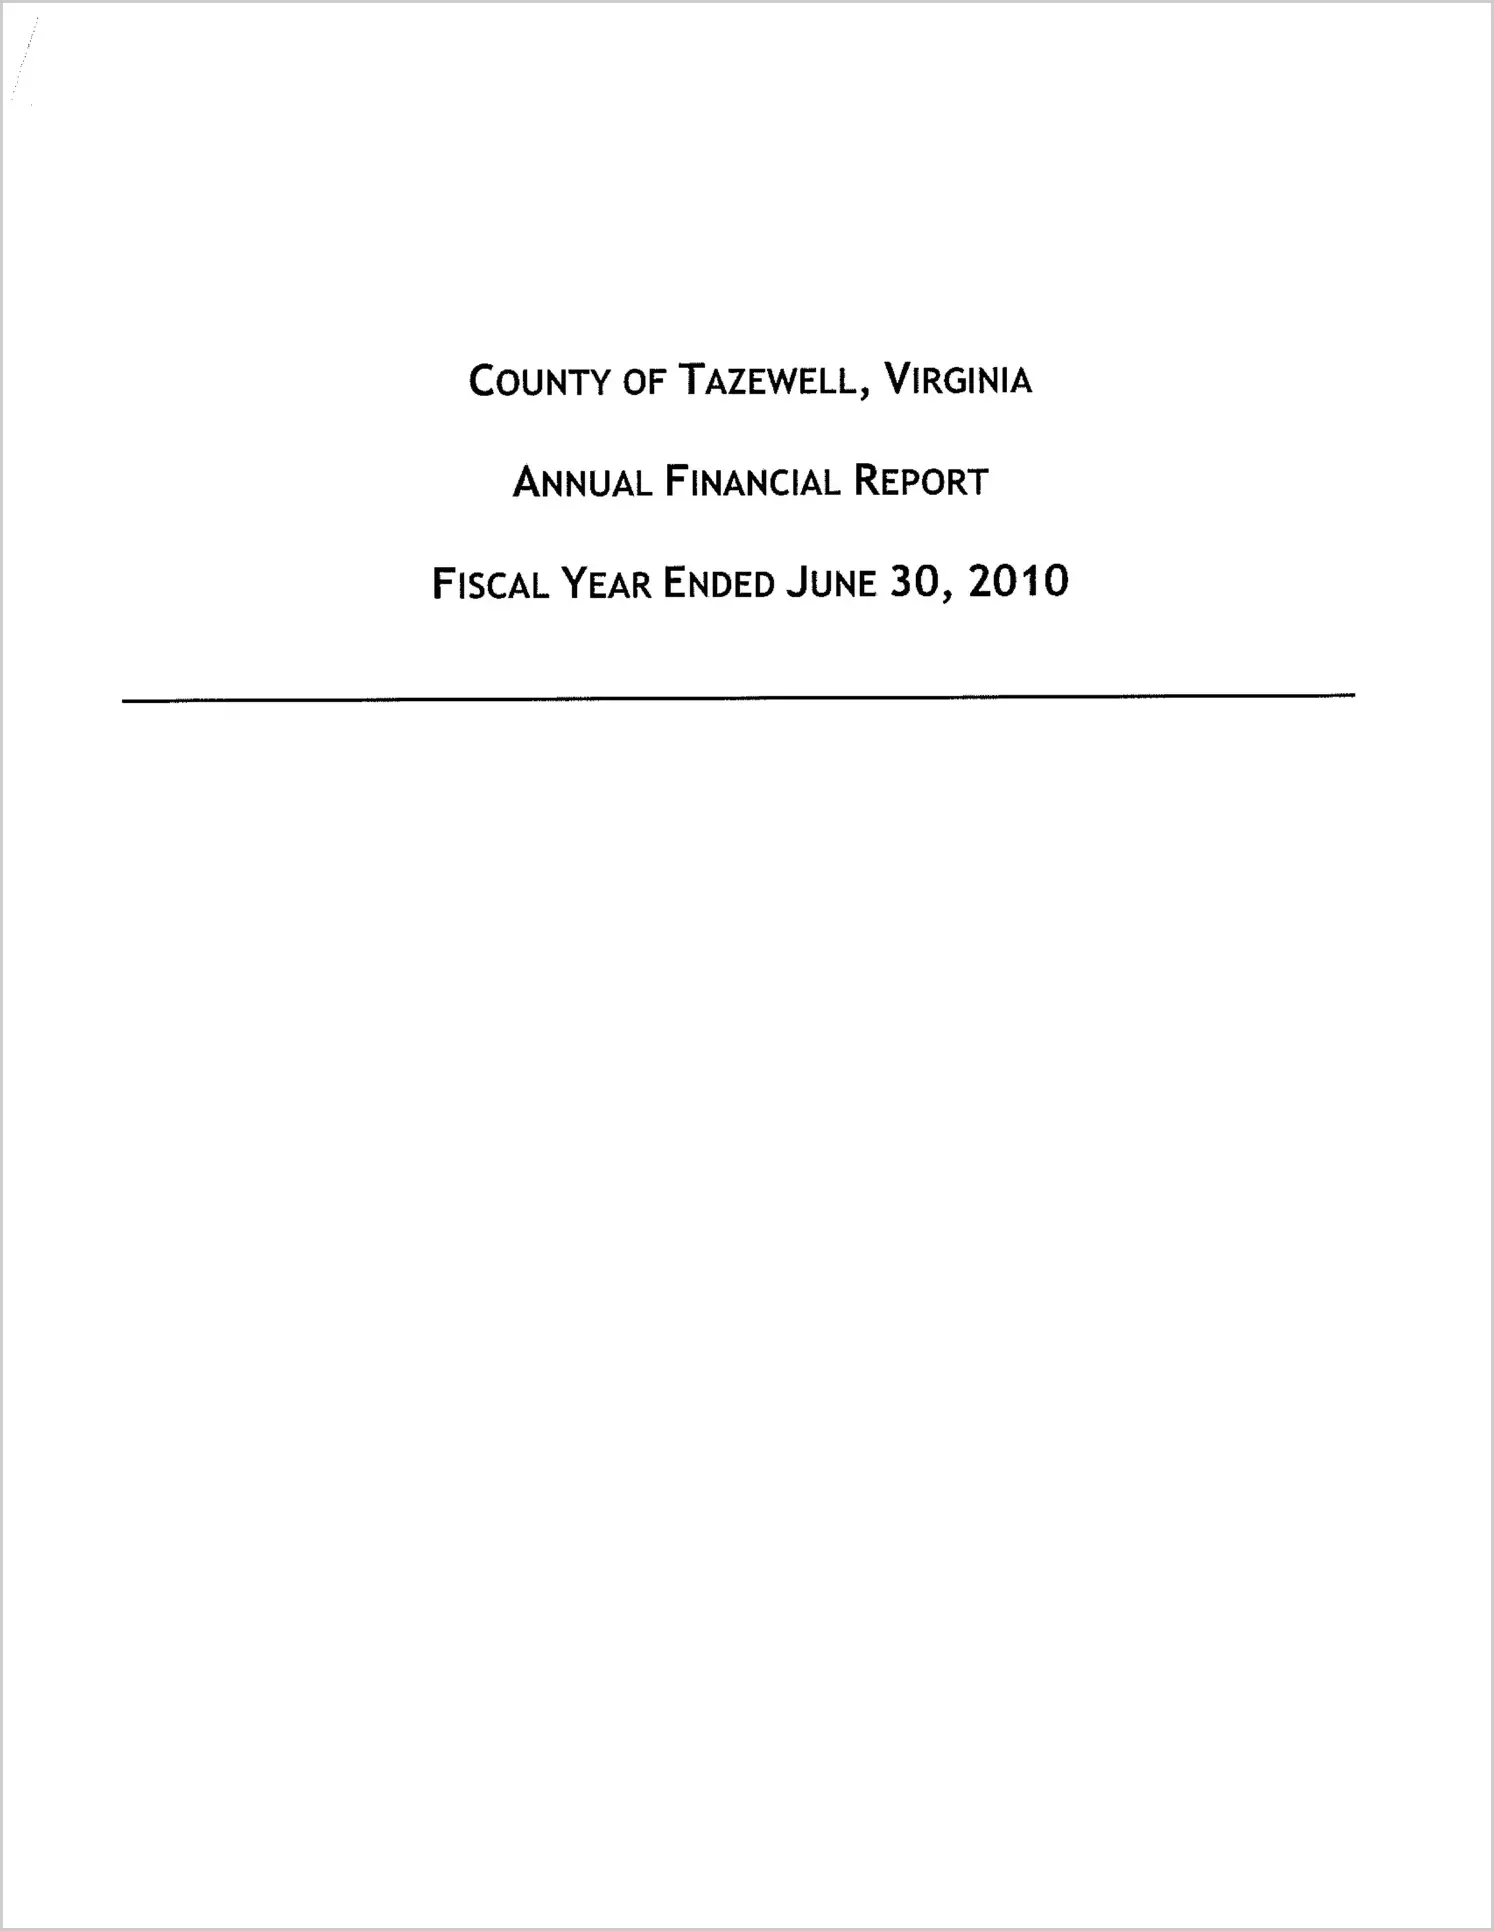 2010 Annual Financial Report for County of Tazewell